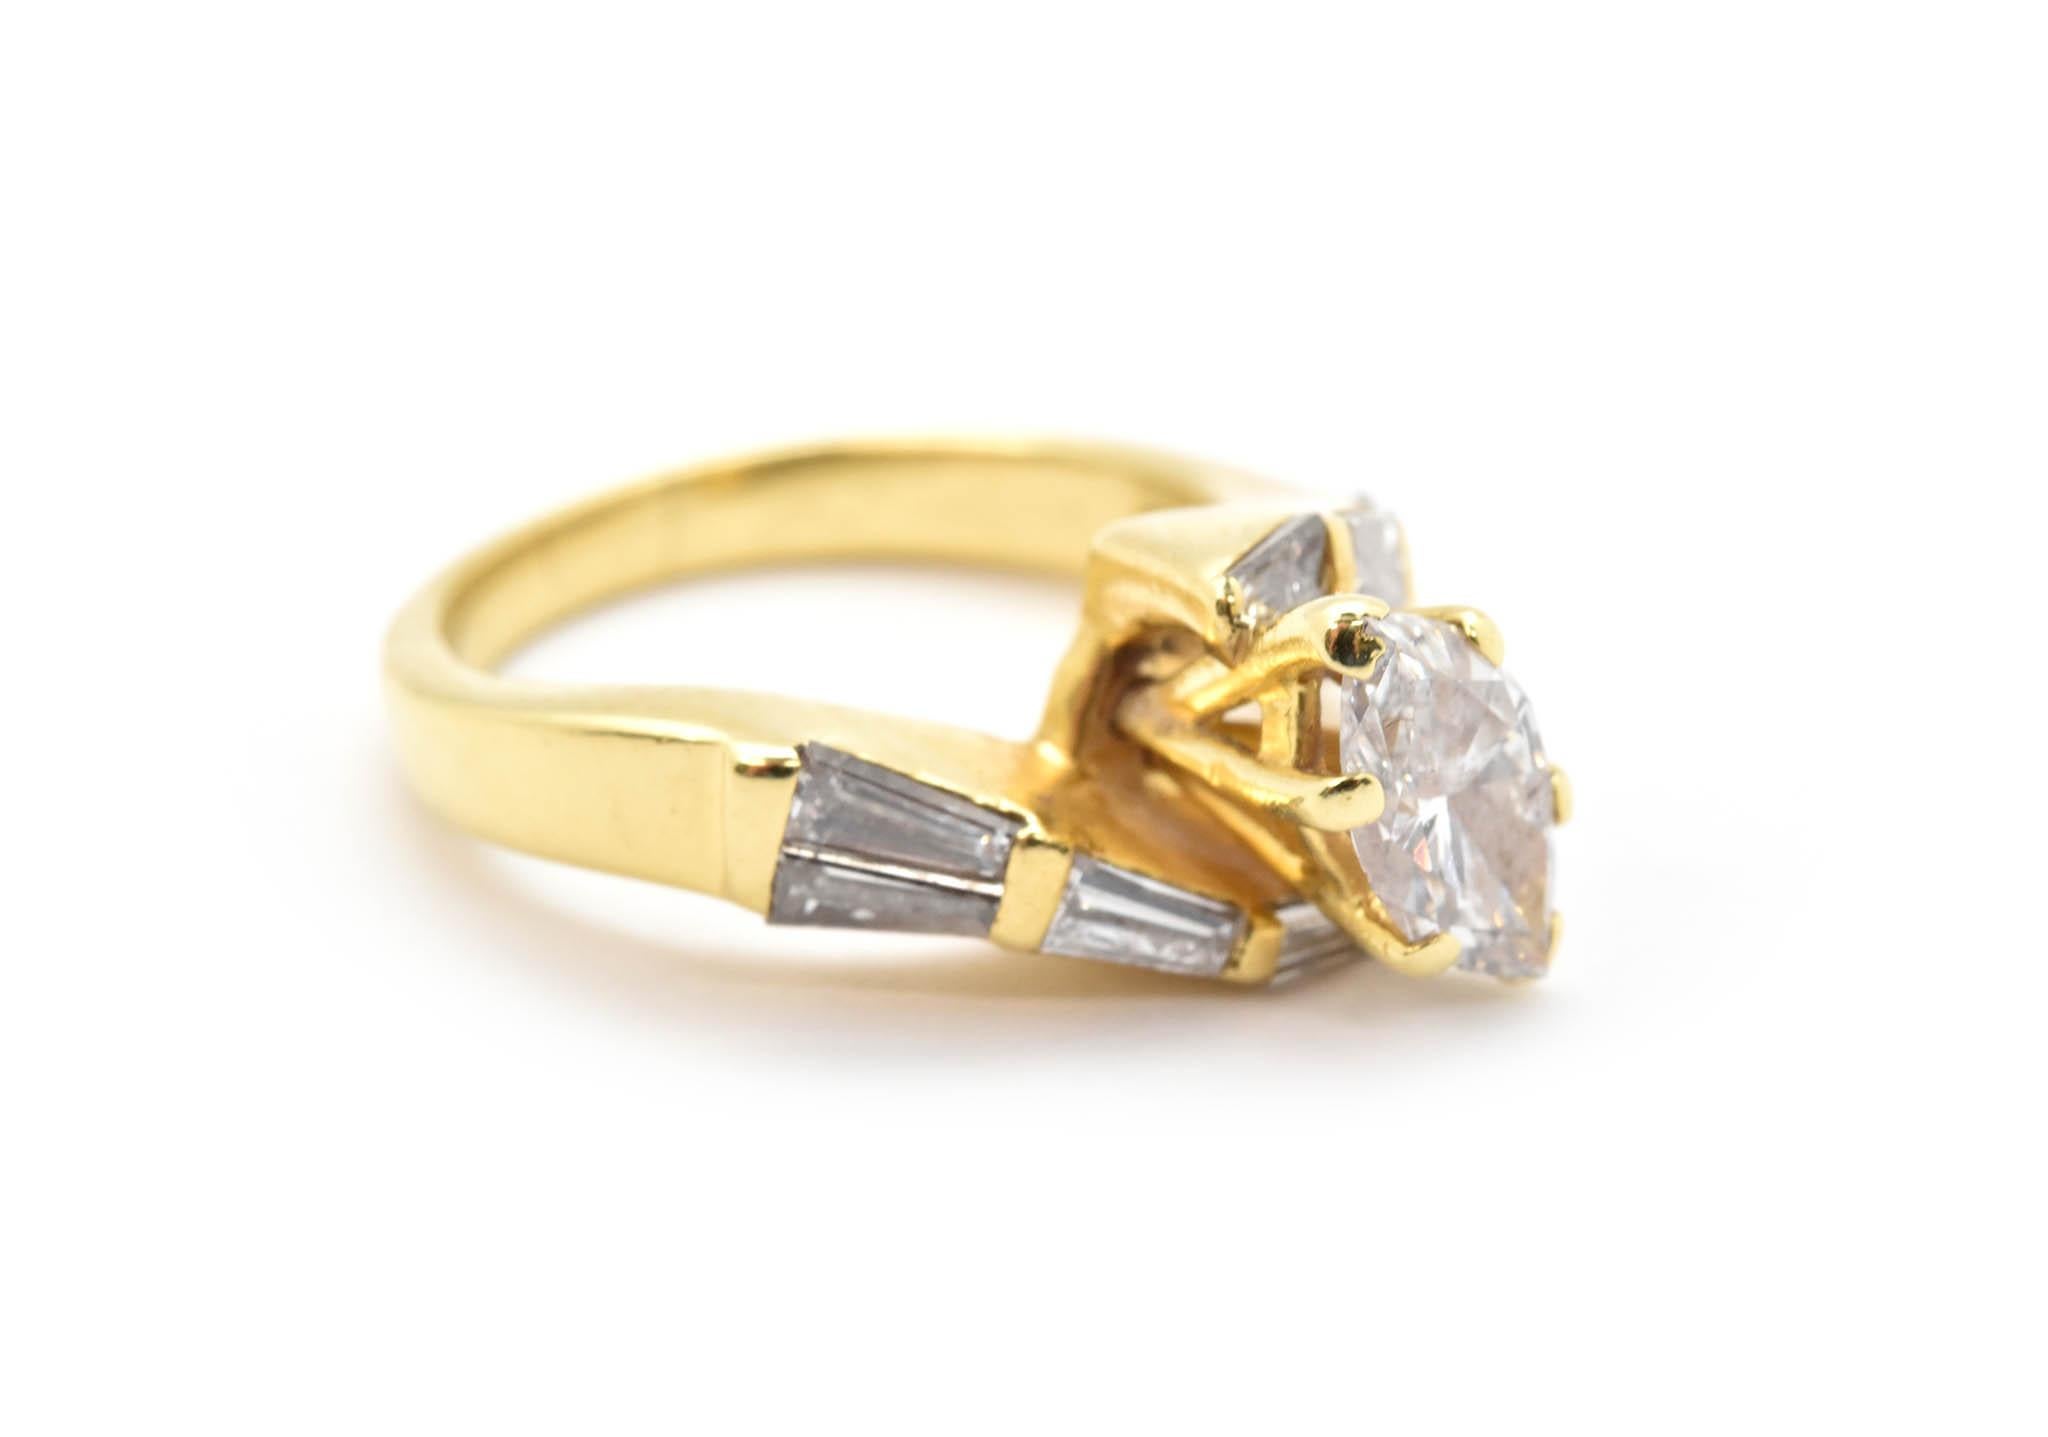 This lovely marquise diamond engagement ring is designed in 18k yellow gold, using a unique design with marquise and baguette diamonds. The center diamond of this ring is 0.85ct, H in color and SI2 in clarity. Surrounding the center stone, are